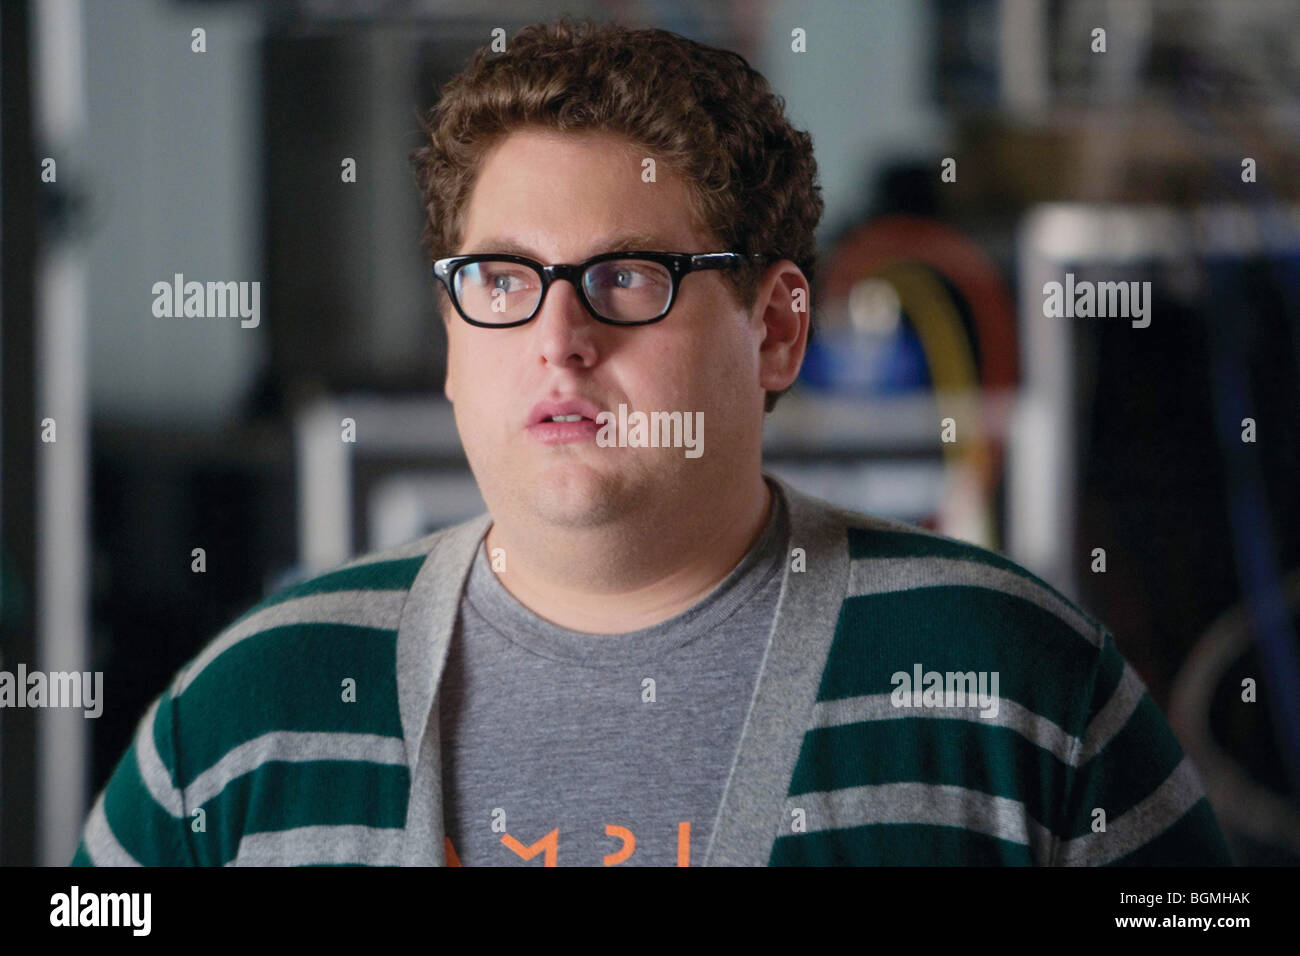 Funny People Year : 2009 Director : Judd Apatow Jonah Hill Stock Photo